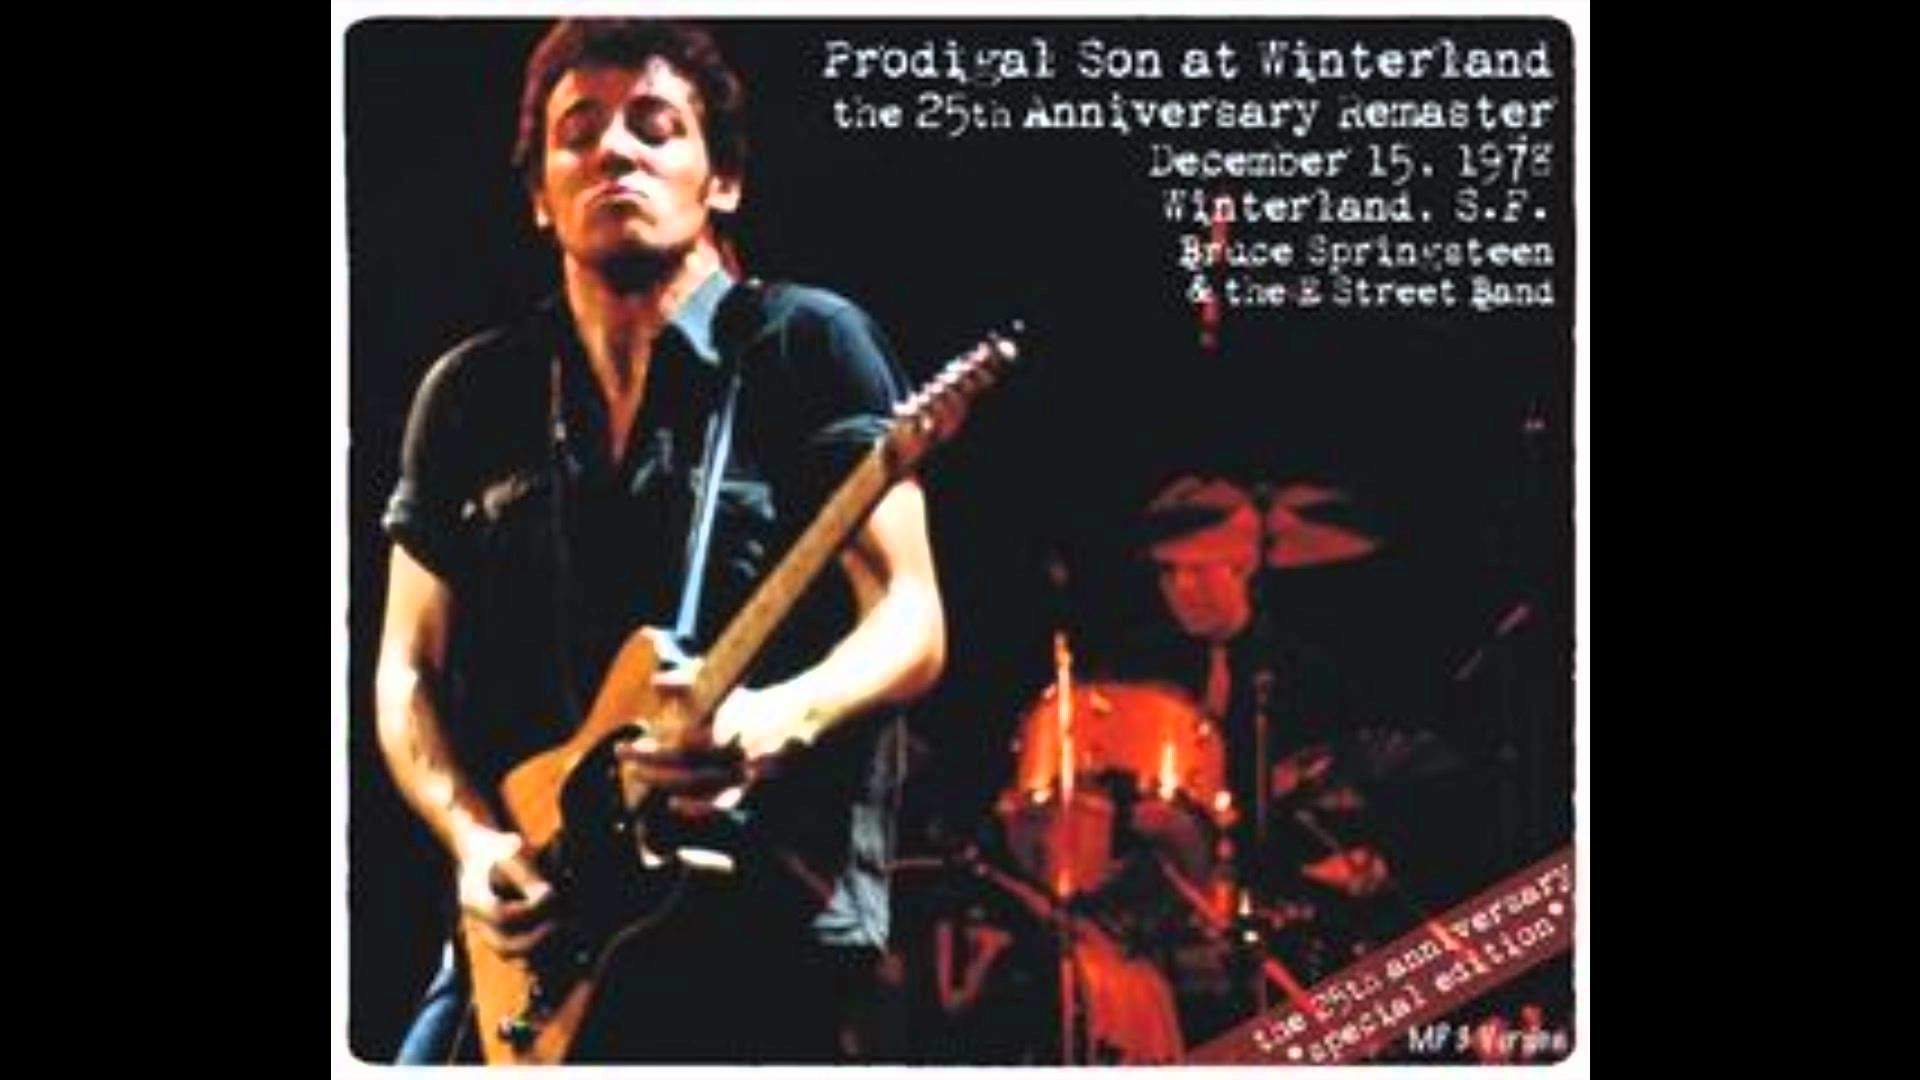 1920x1080 Bruce Springsteen - Live At Winterland - 18. Mona/She's The One - YouTube